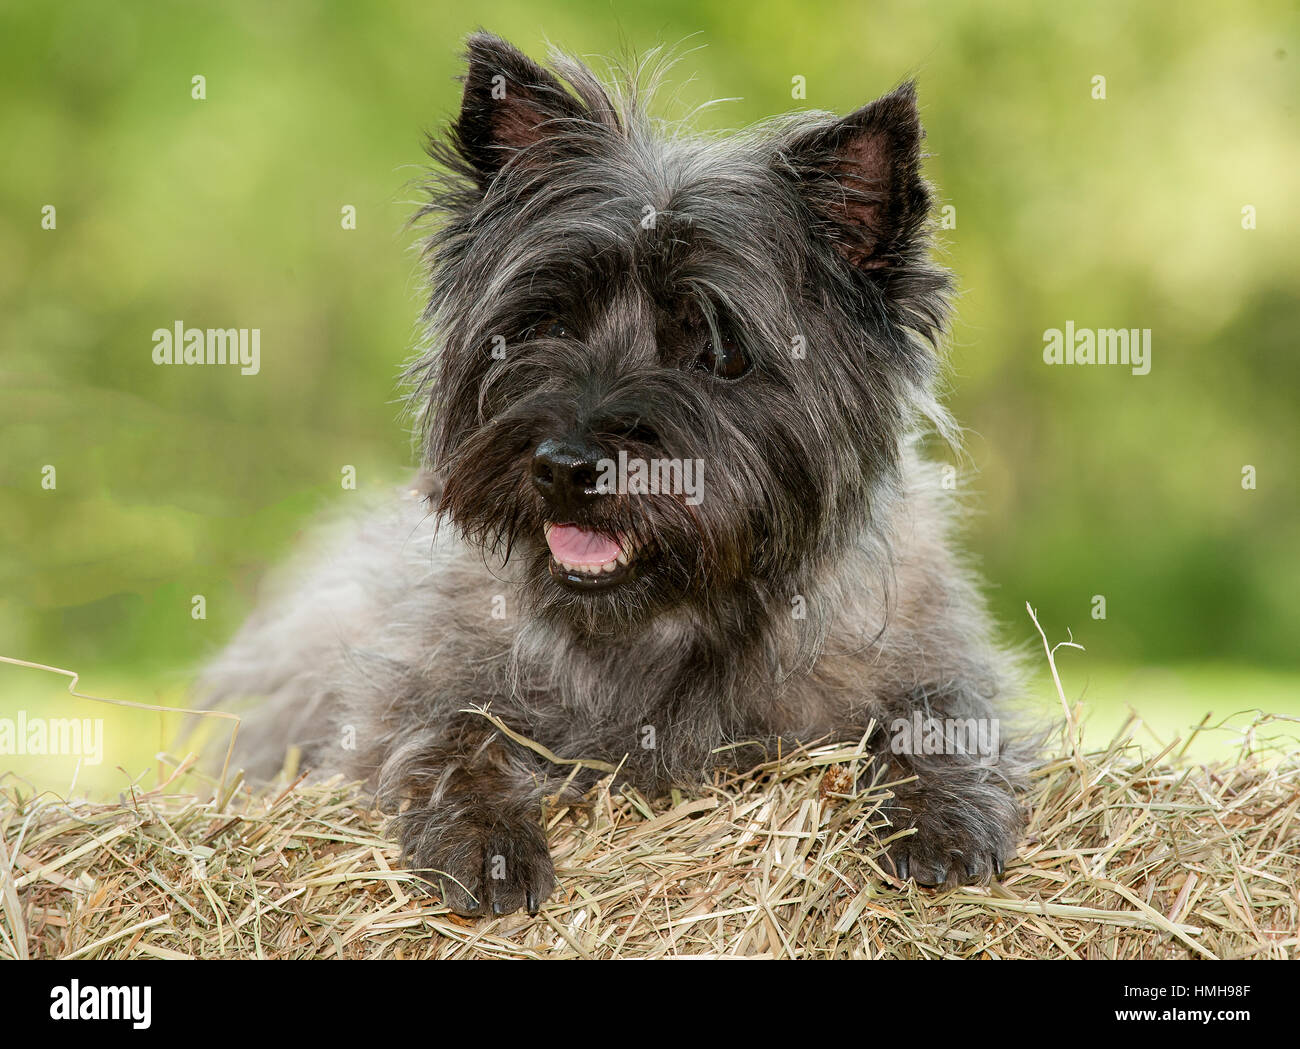 Stunning Beautiful Purebred Akc Westminster Bloodline Cairn Terrier Stock Photo 133146175 Alamy